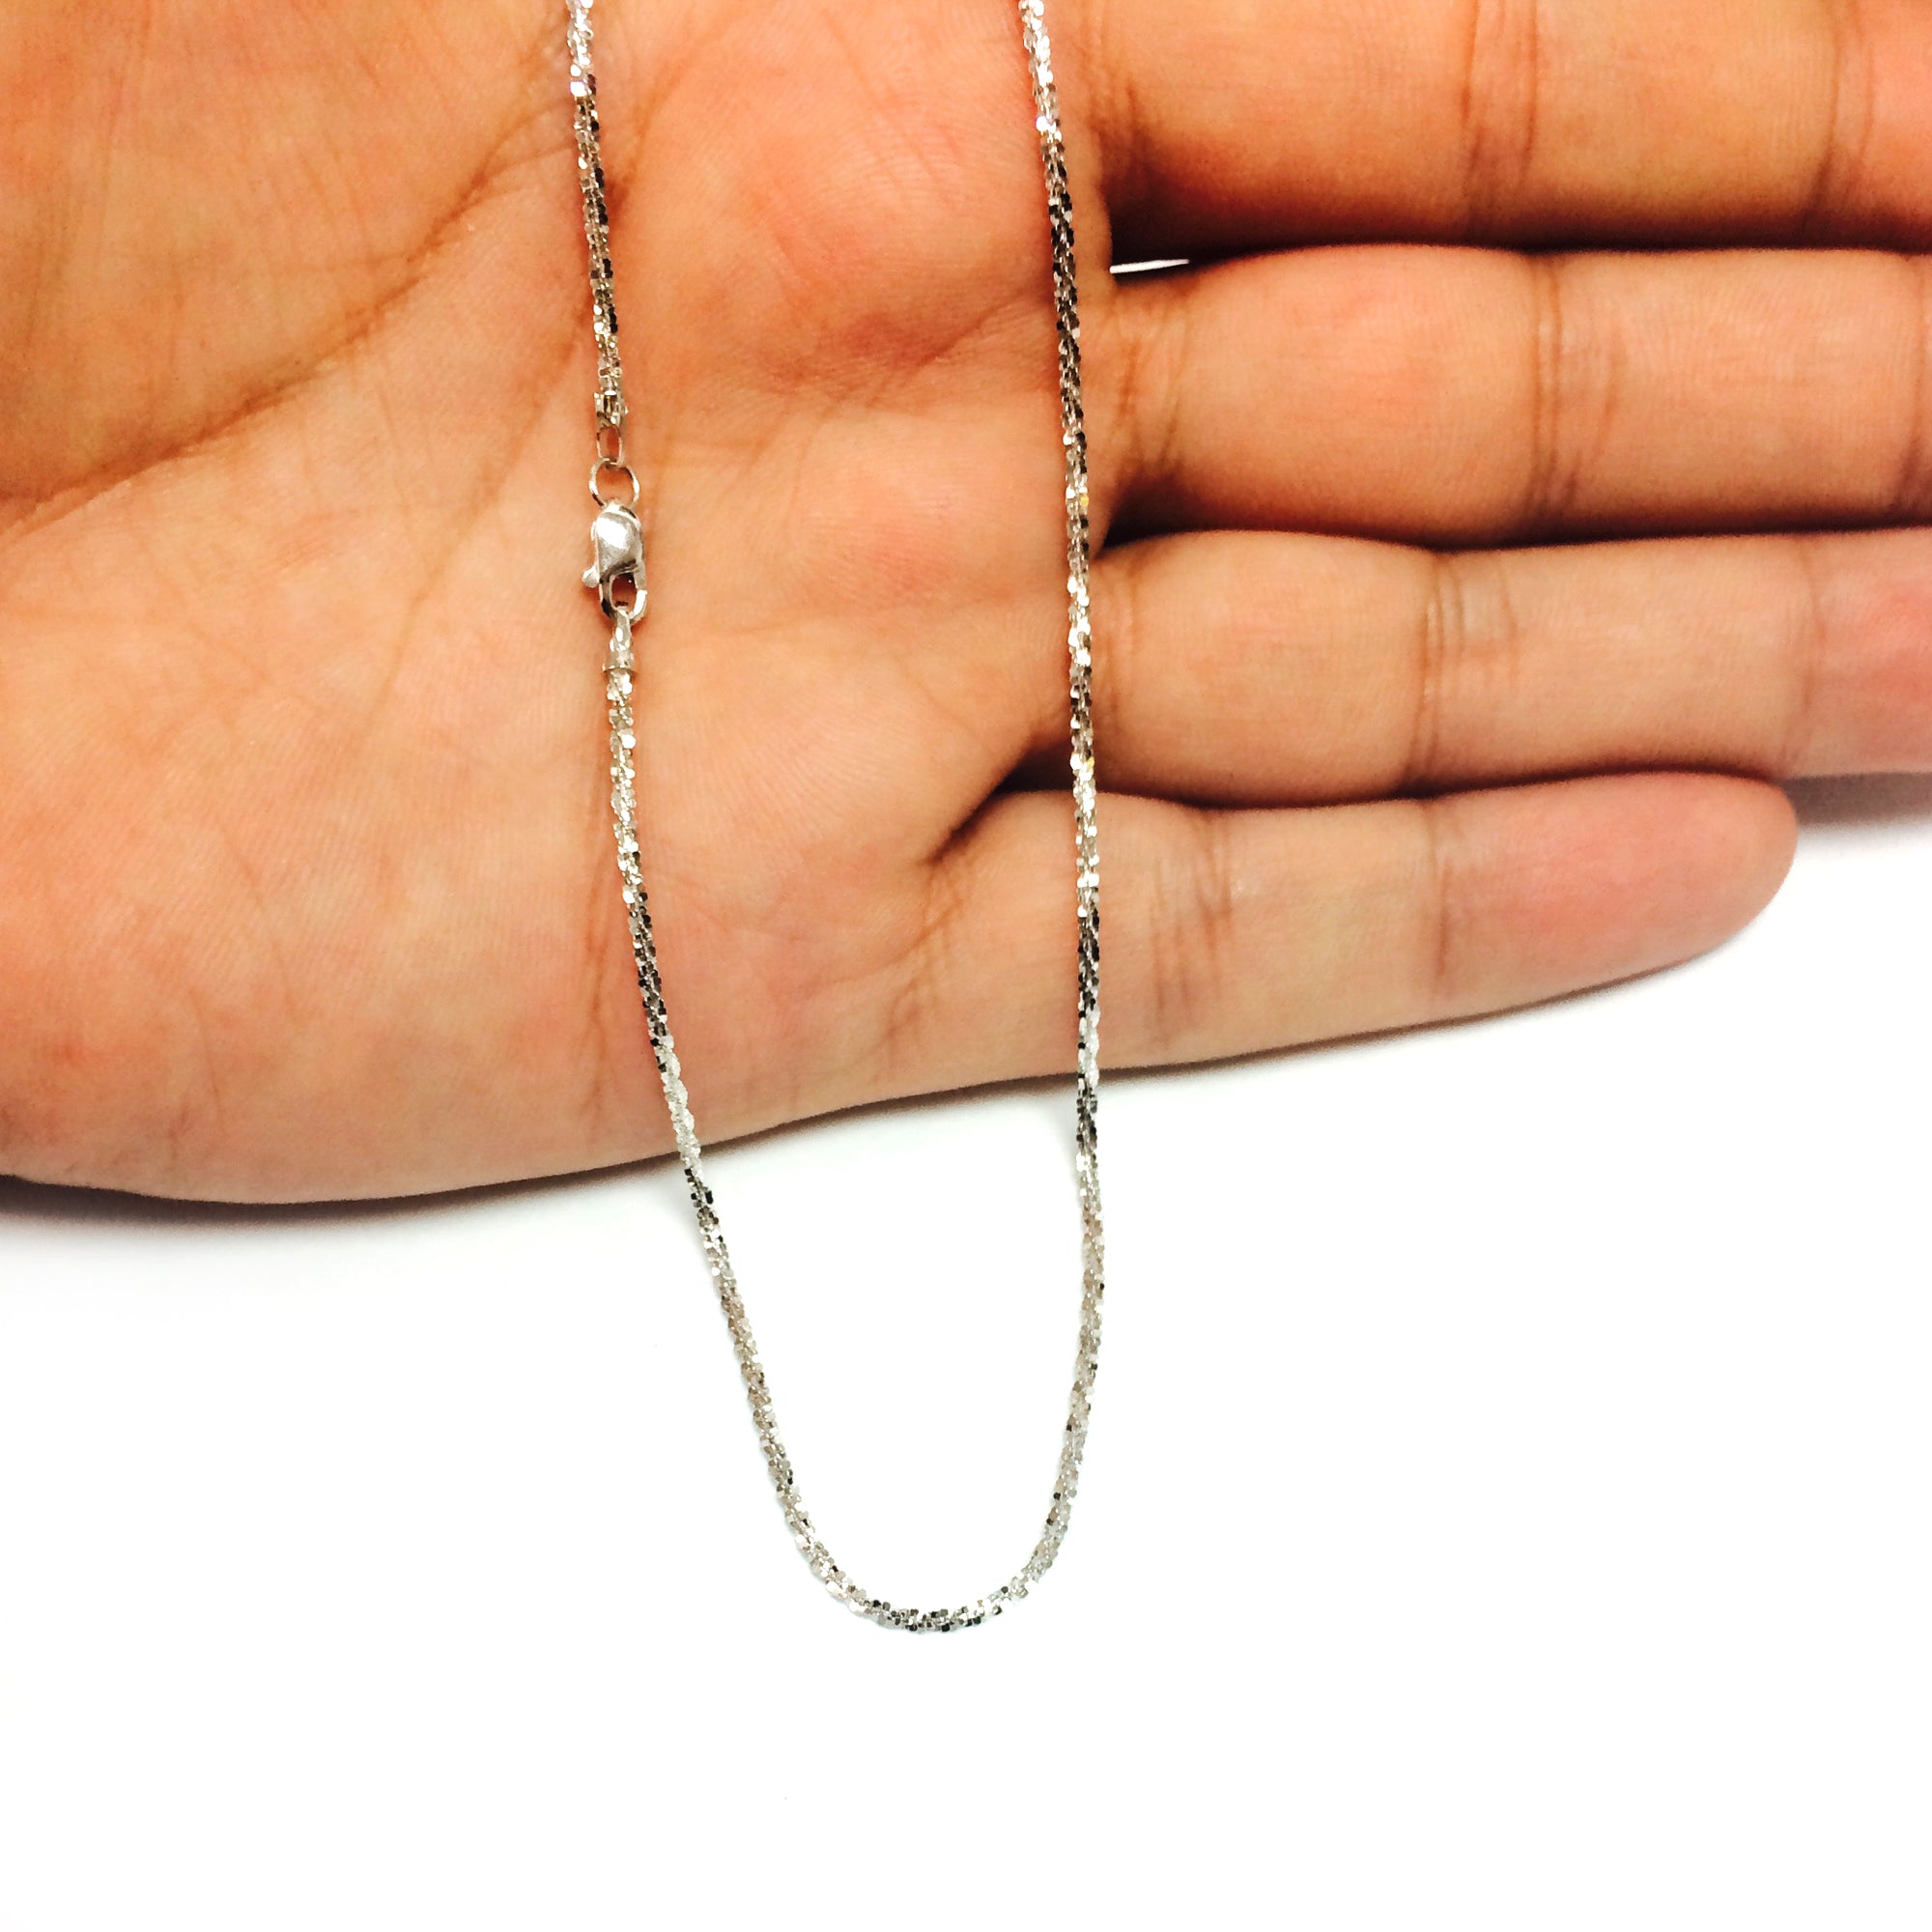 14k White Gold Sparkle Chain Necklace, 1.5mm fine designer jewelry for men and women